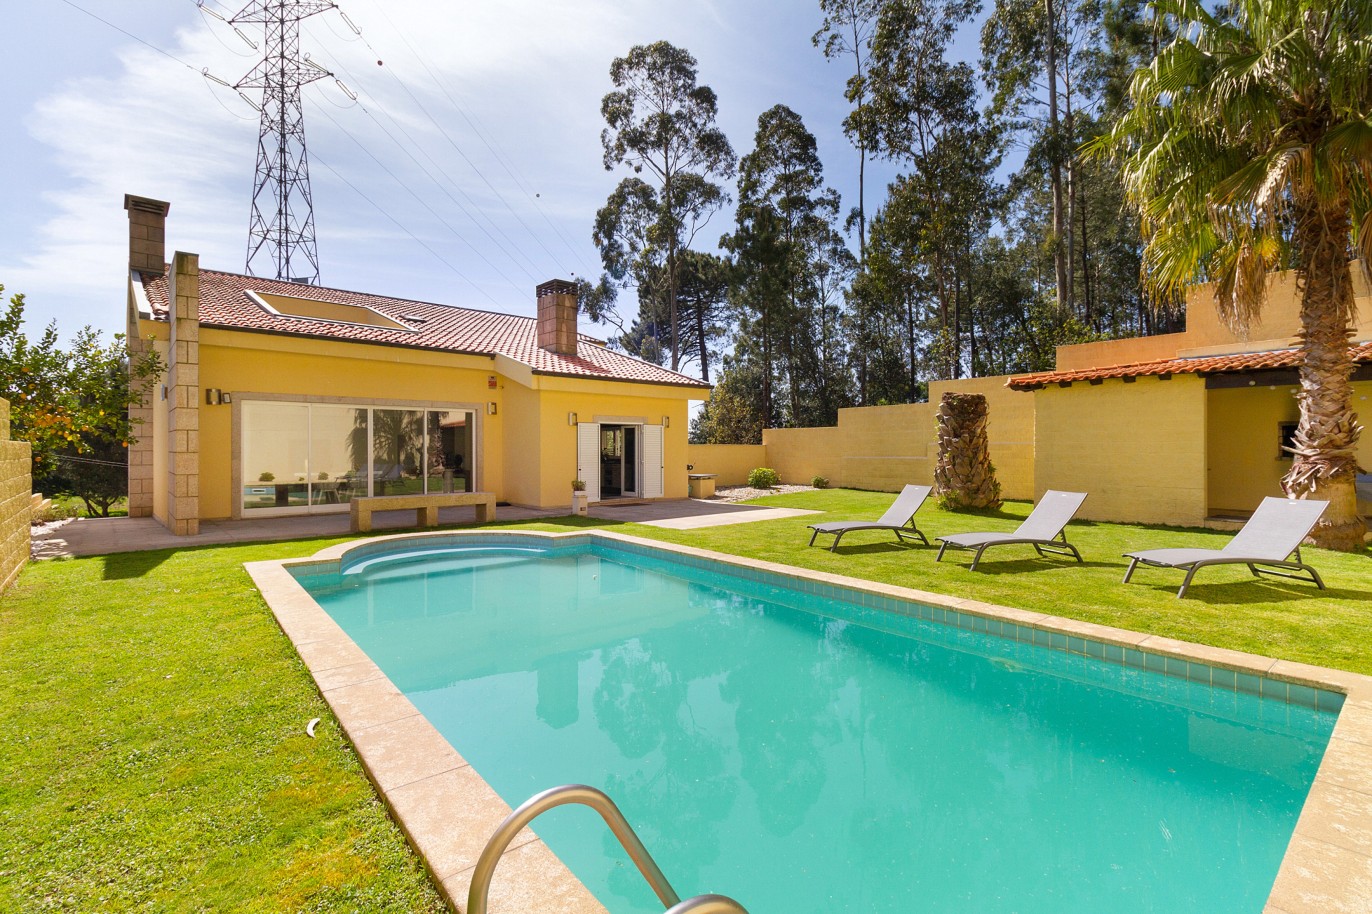 4+1 bedroom villa with pool and garden, for sale, Perosinho, V. N. Gaia, Portugal_220763